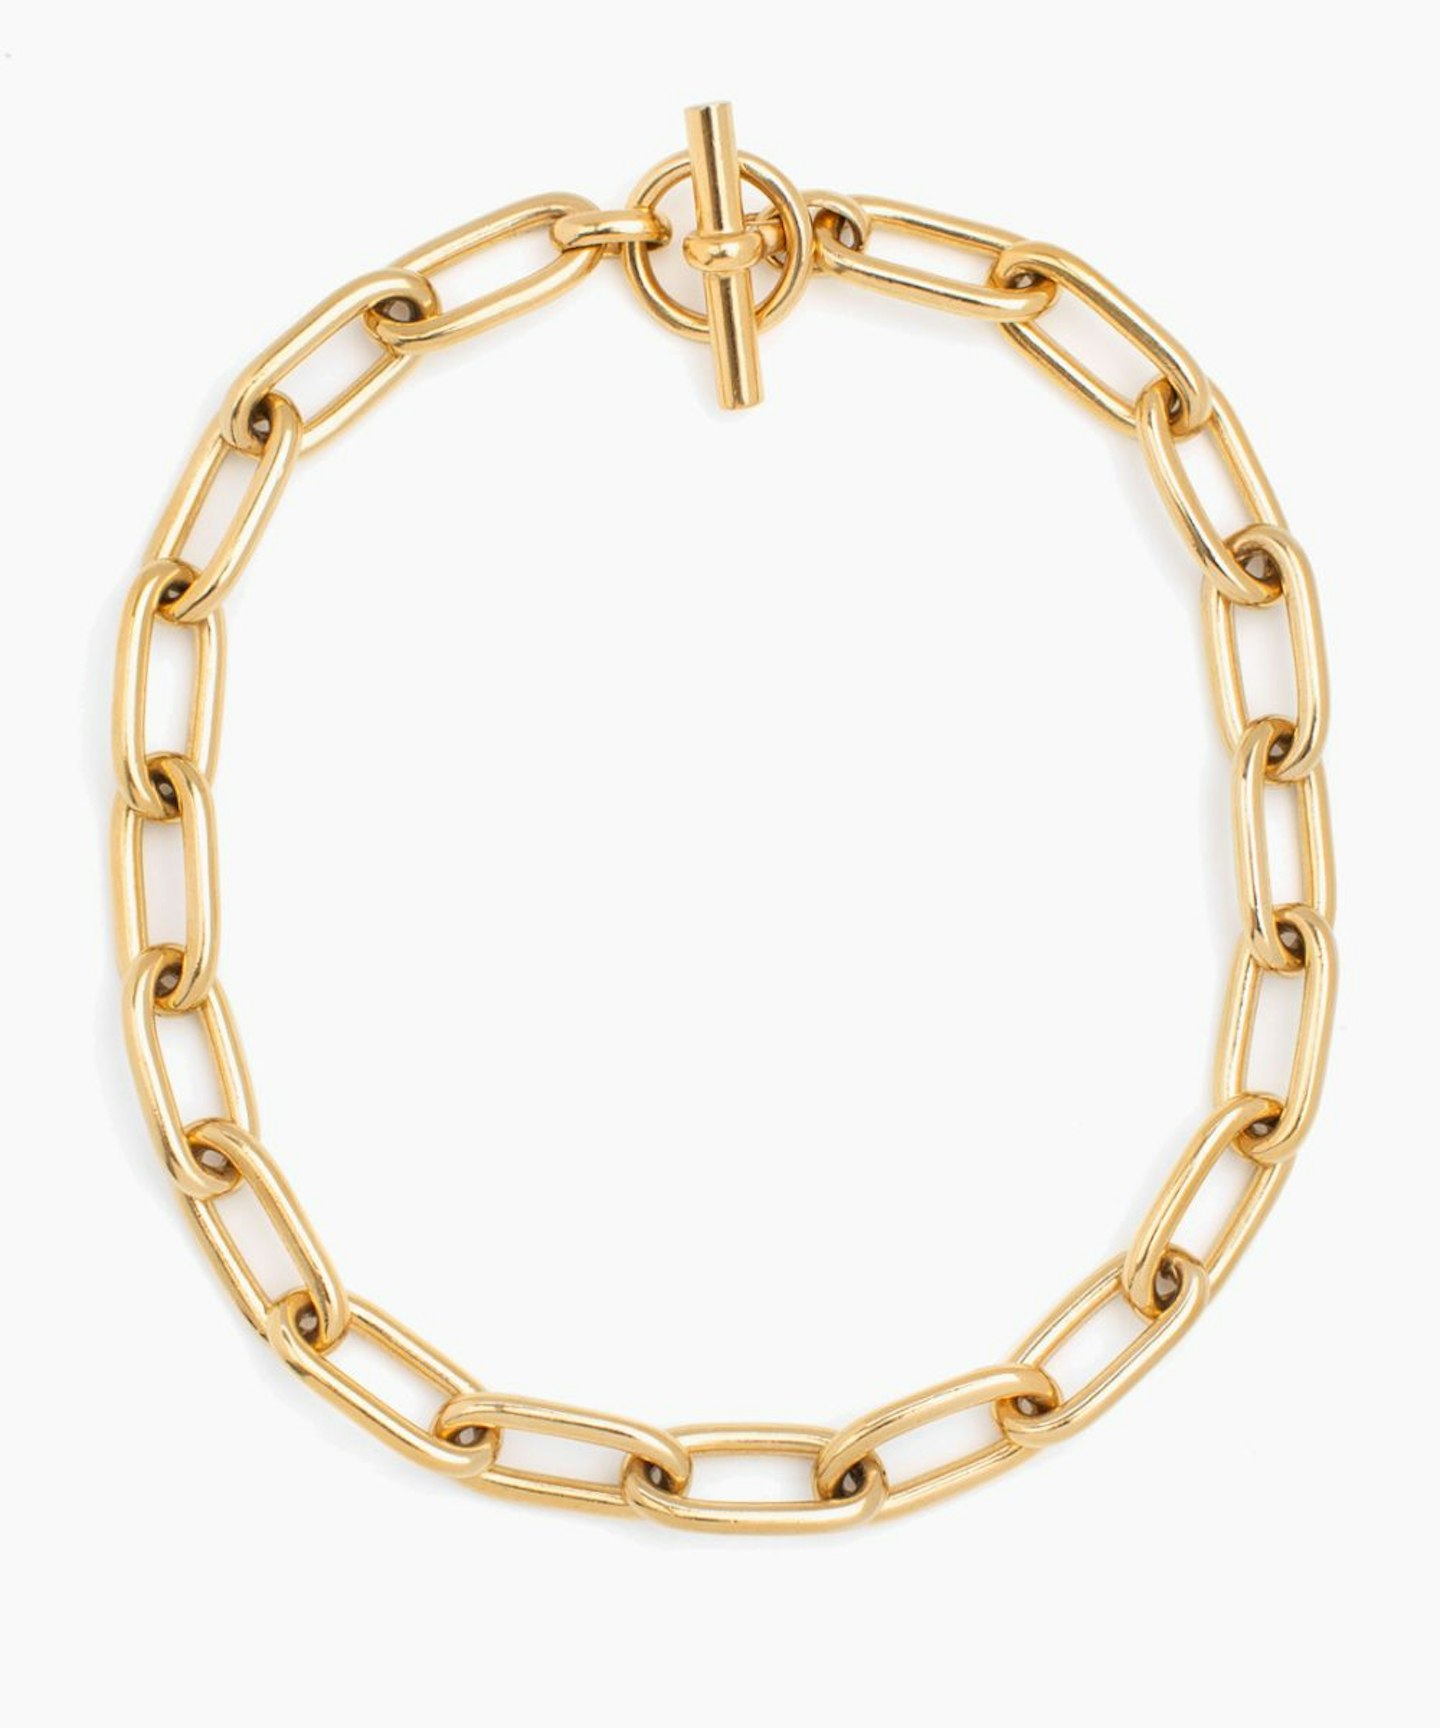 Medium Gold Oval Chain Necklace